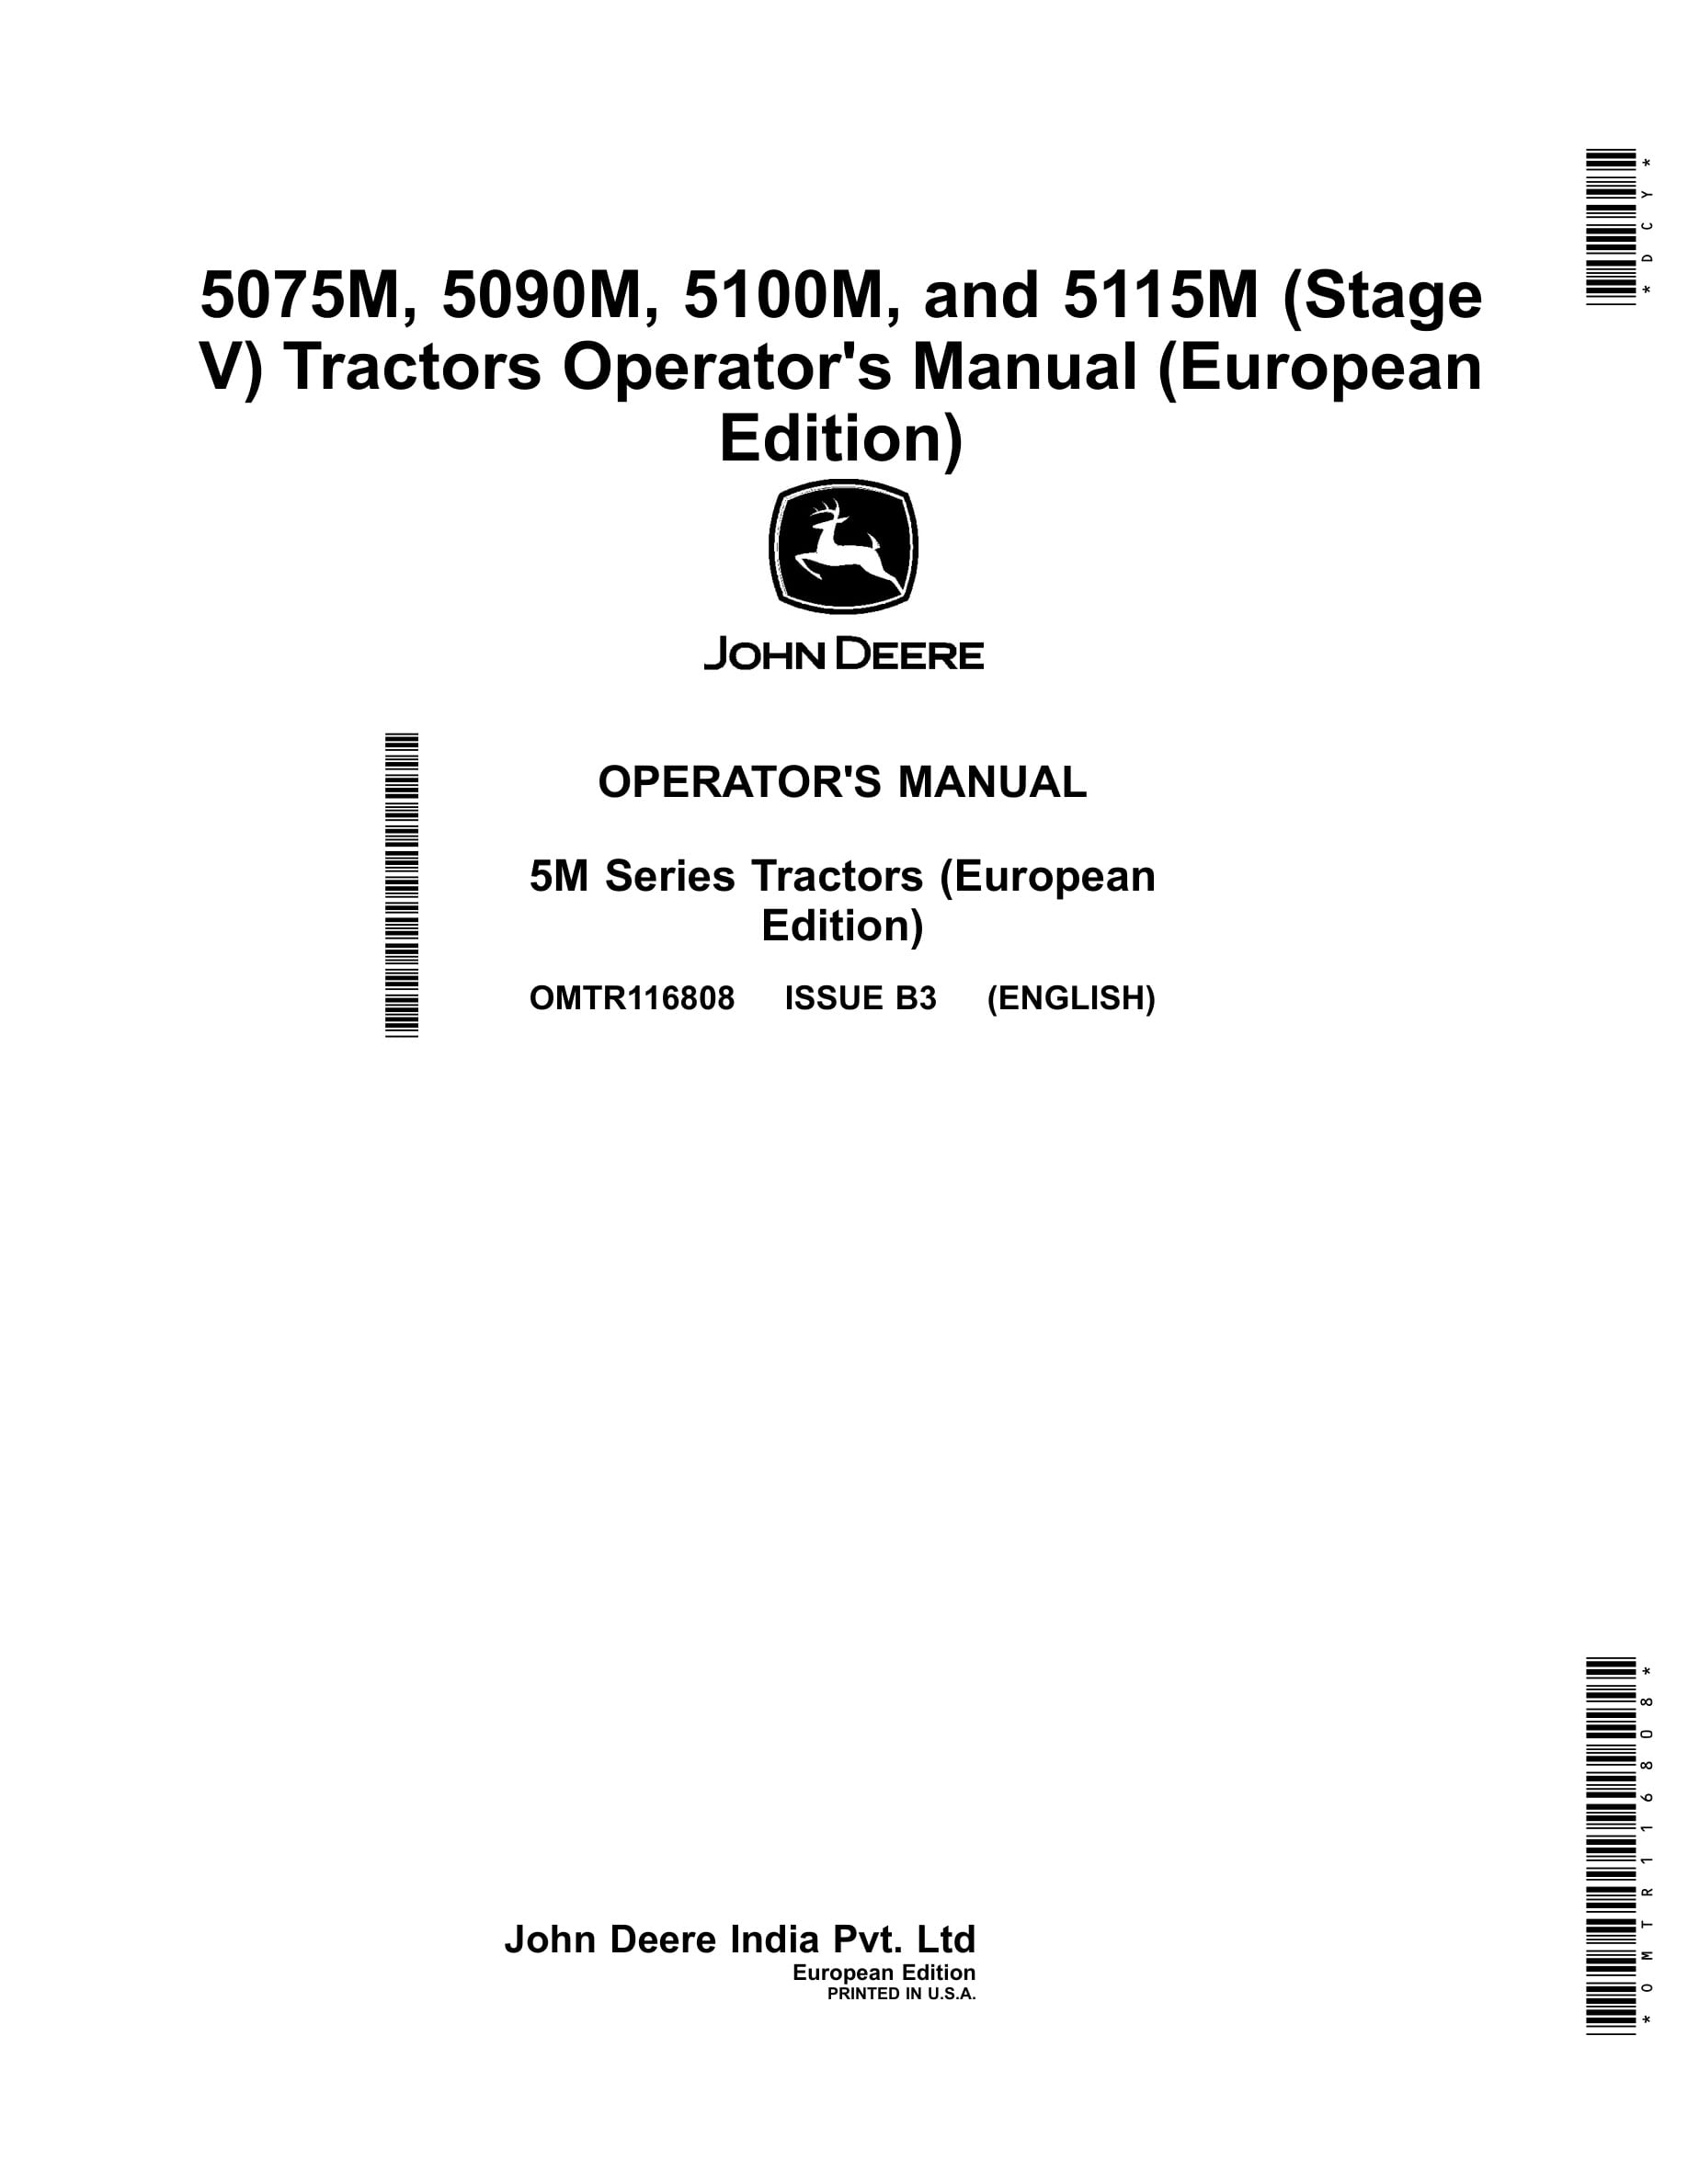 John Deere 5075m, 5090m, 5100m, And 5115m (stage V) Tractors Operator Manuals OMTR116808-1